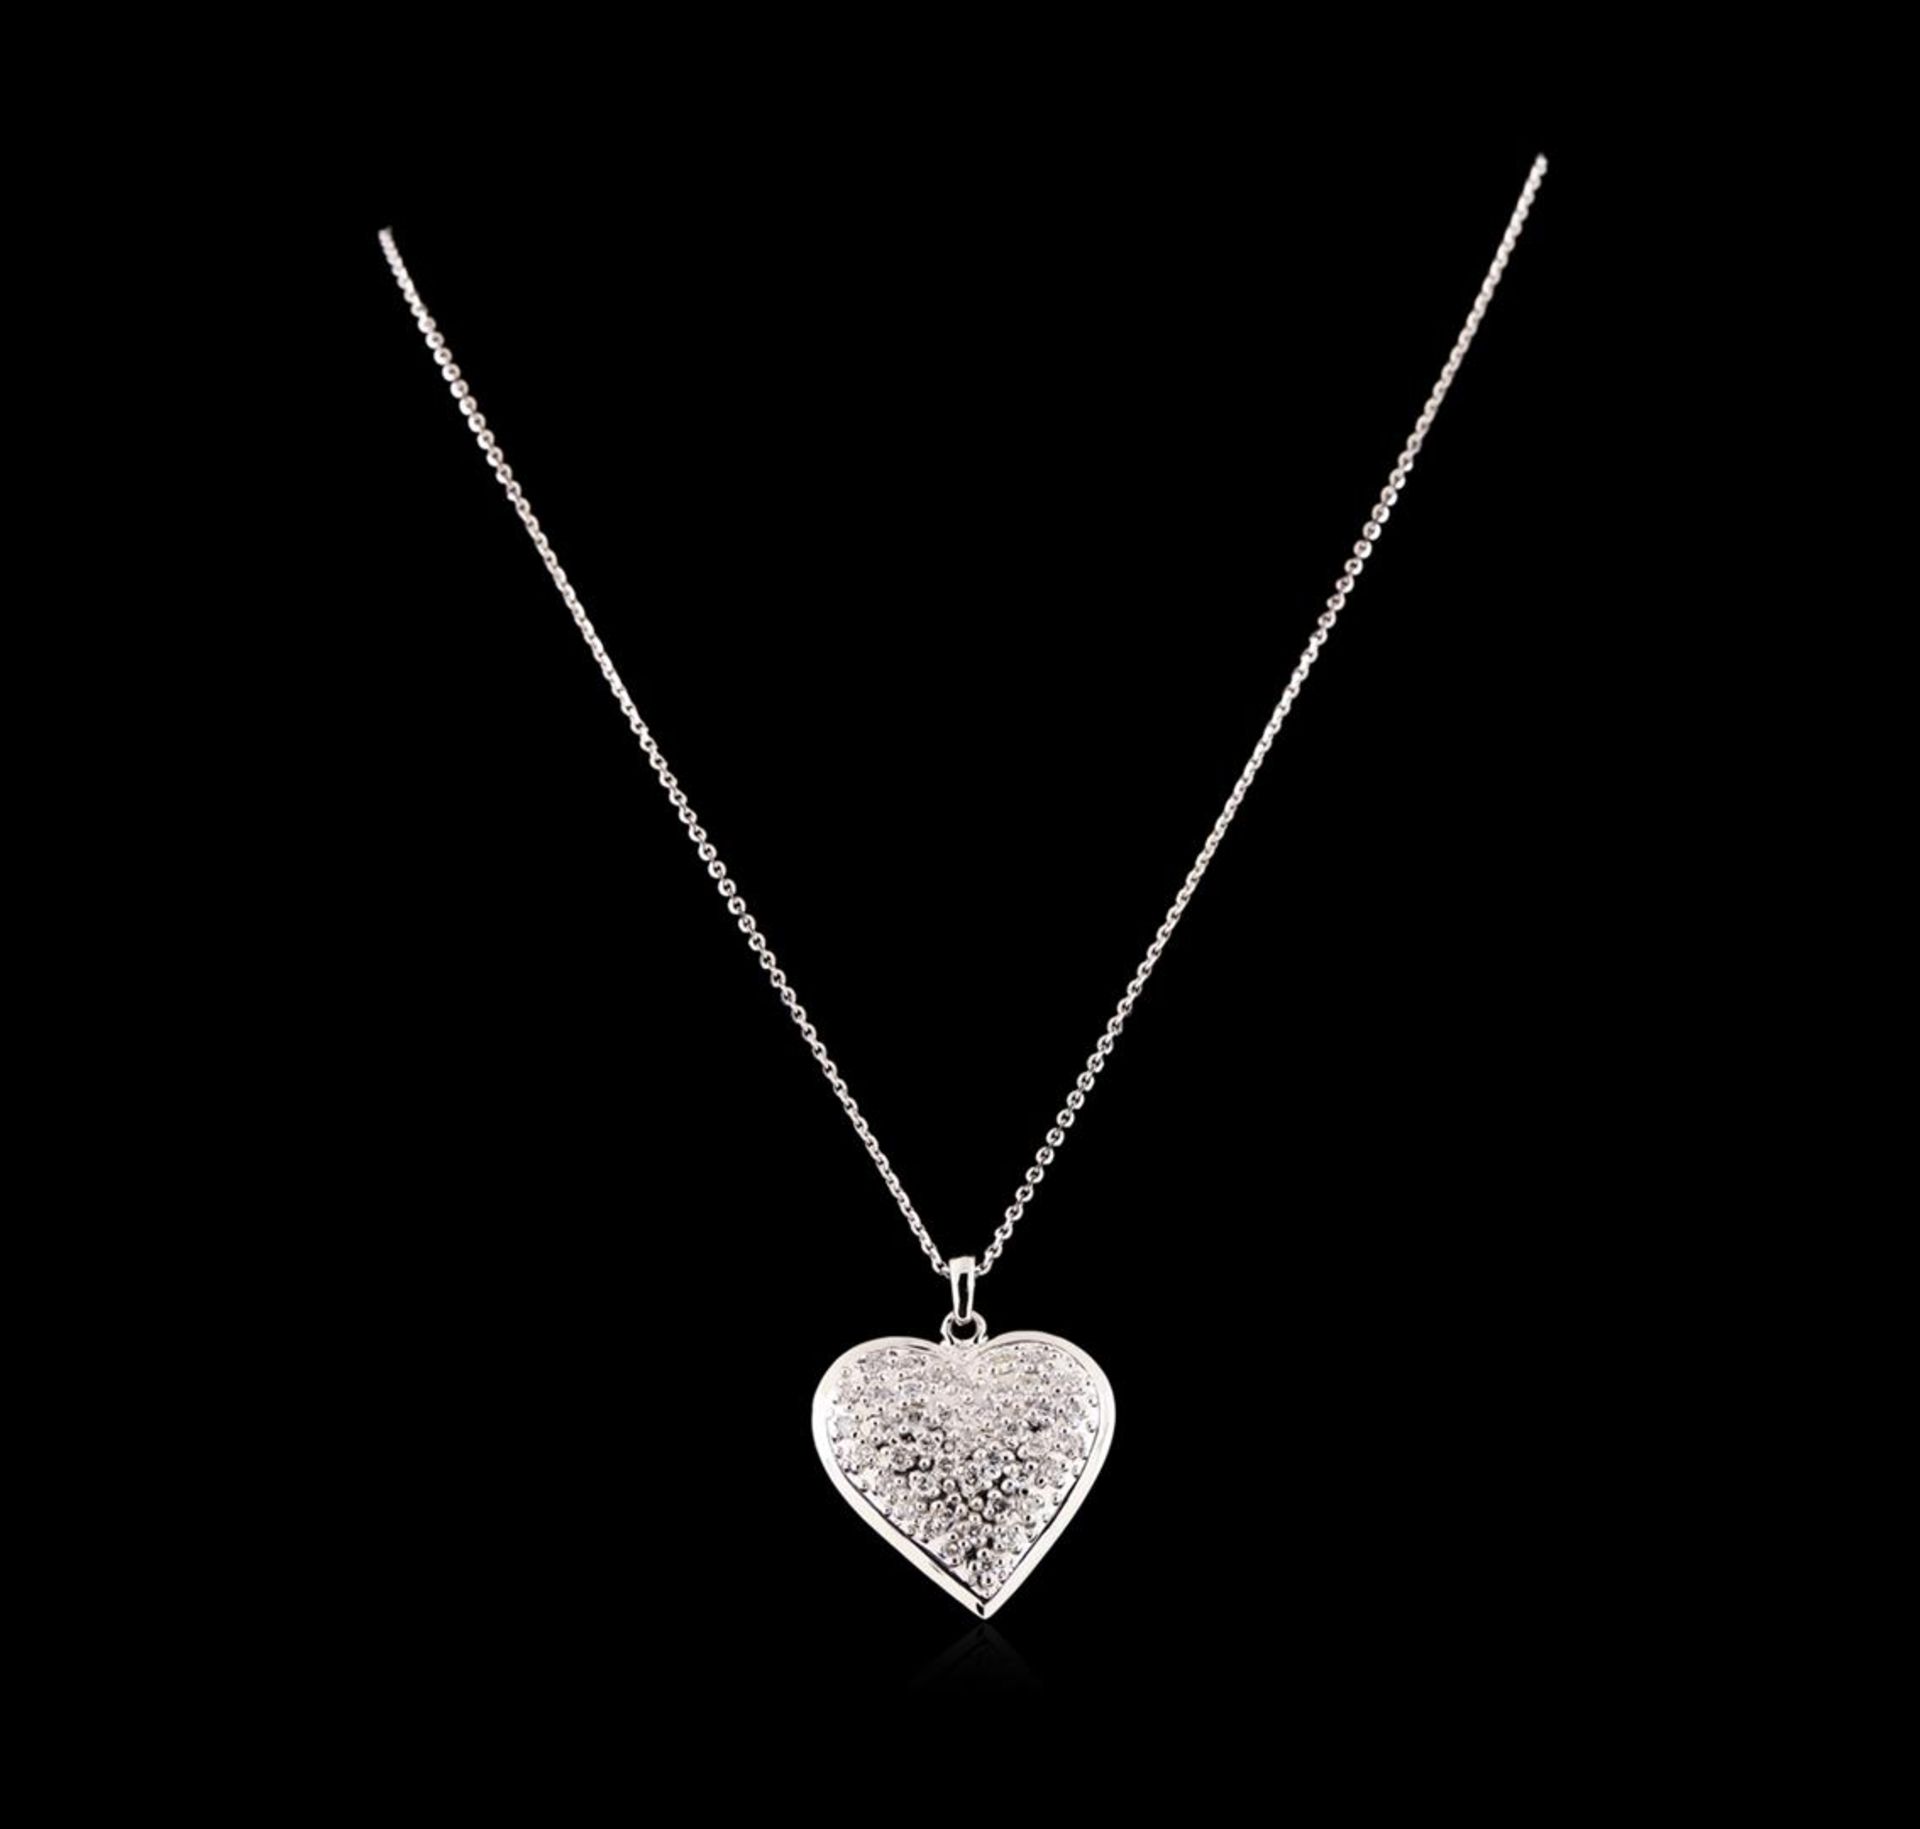 14KT White Gold 1.29 ctw Diamond Heart Pendant With Chain - Image 2 of 3